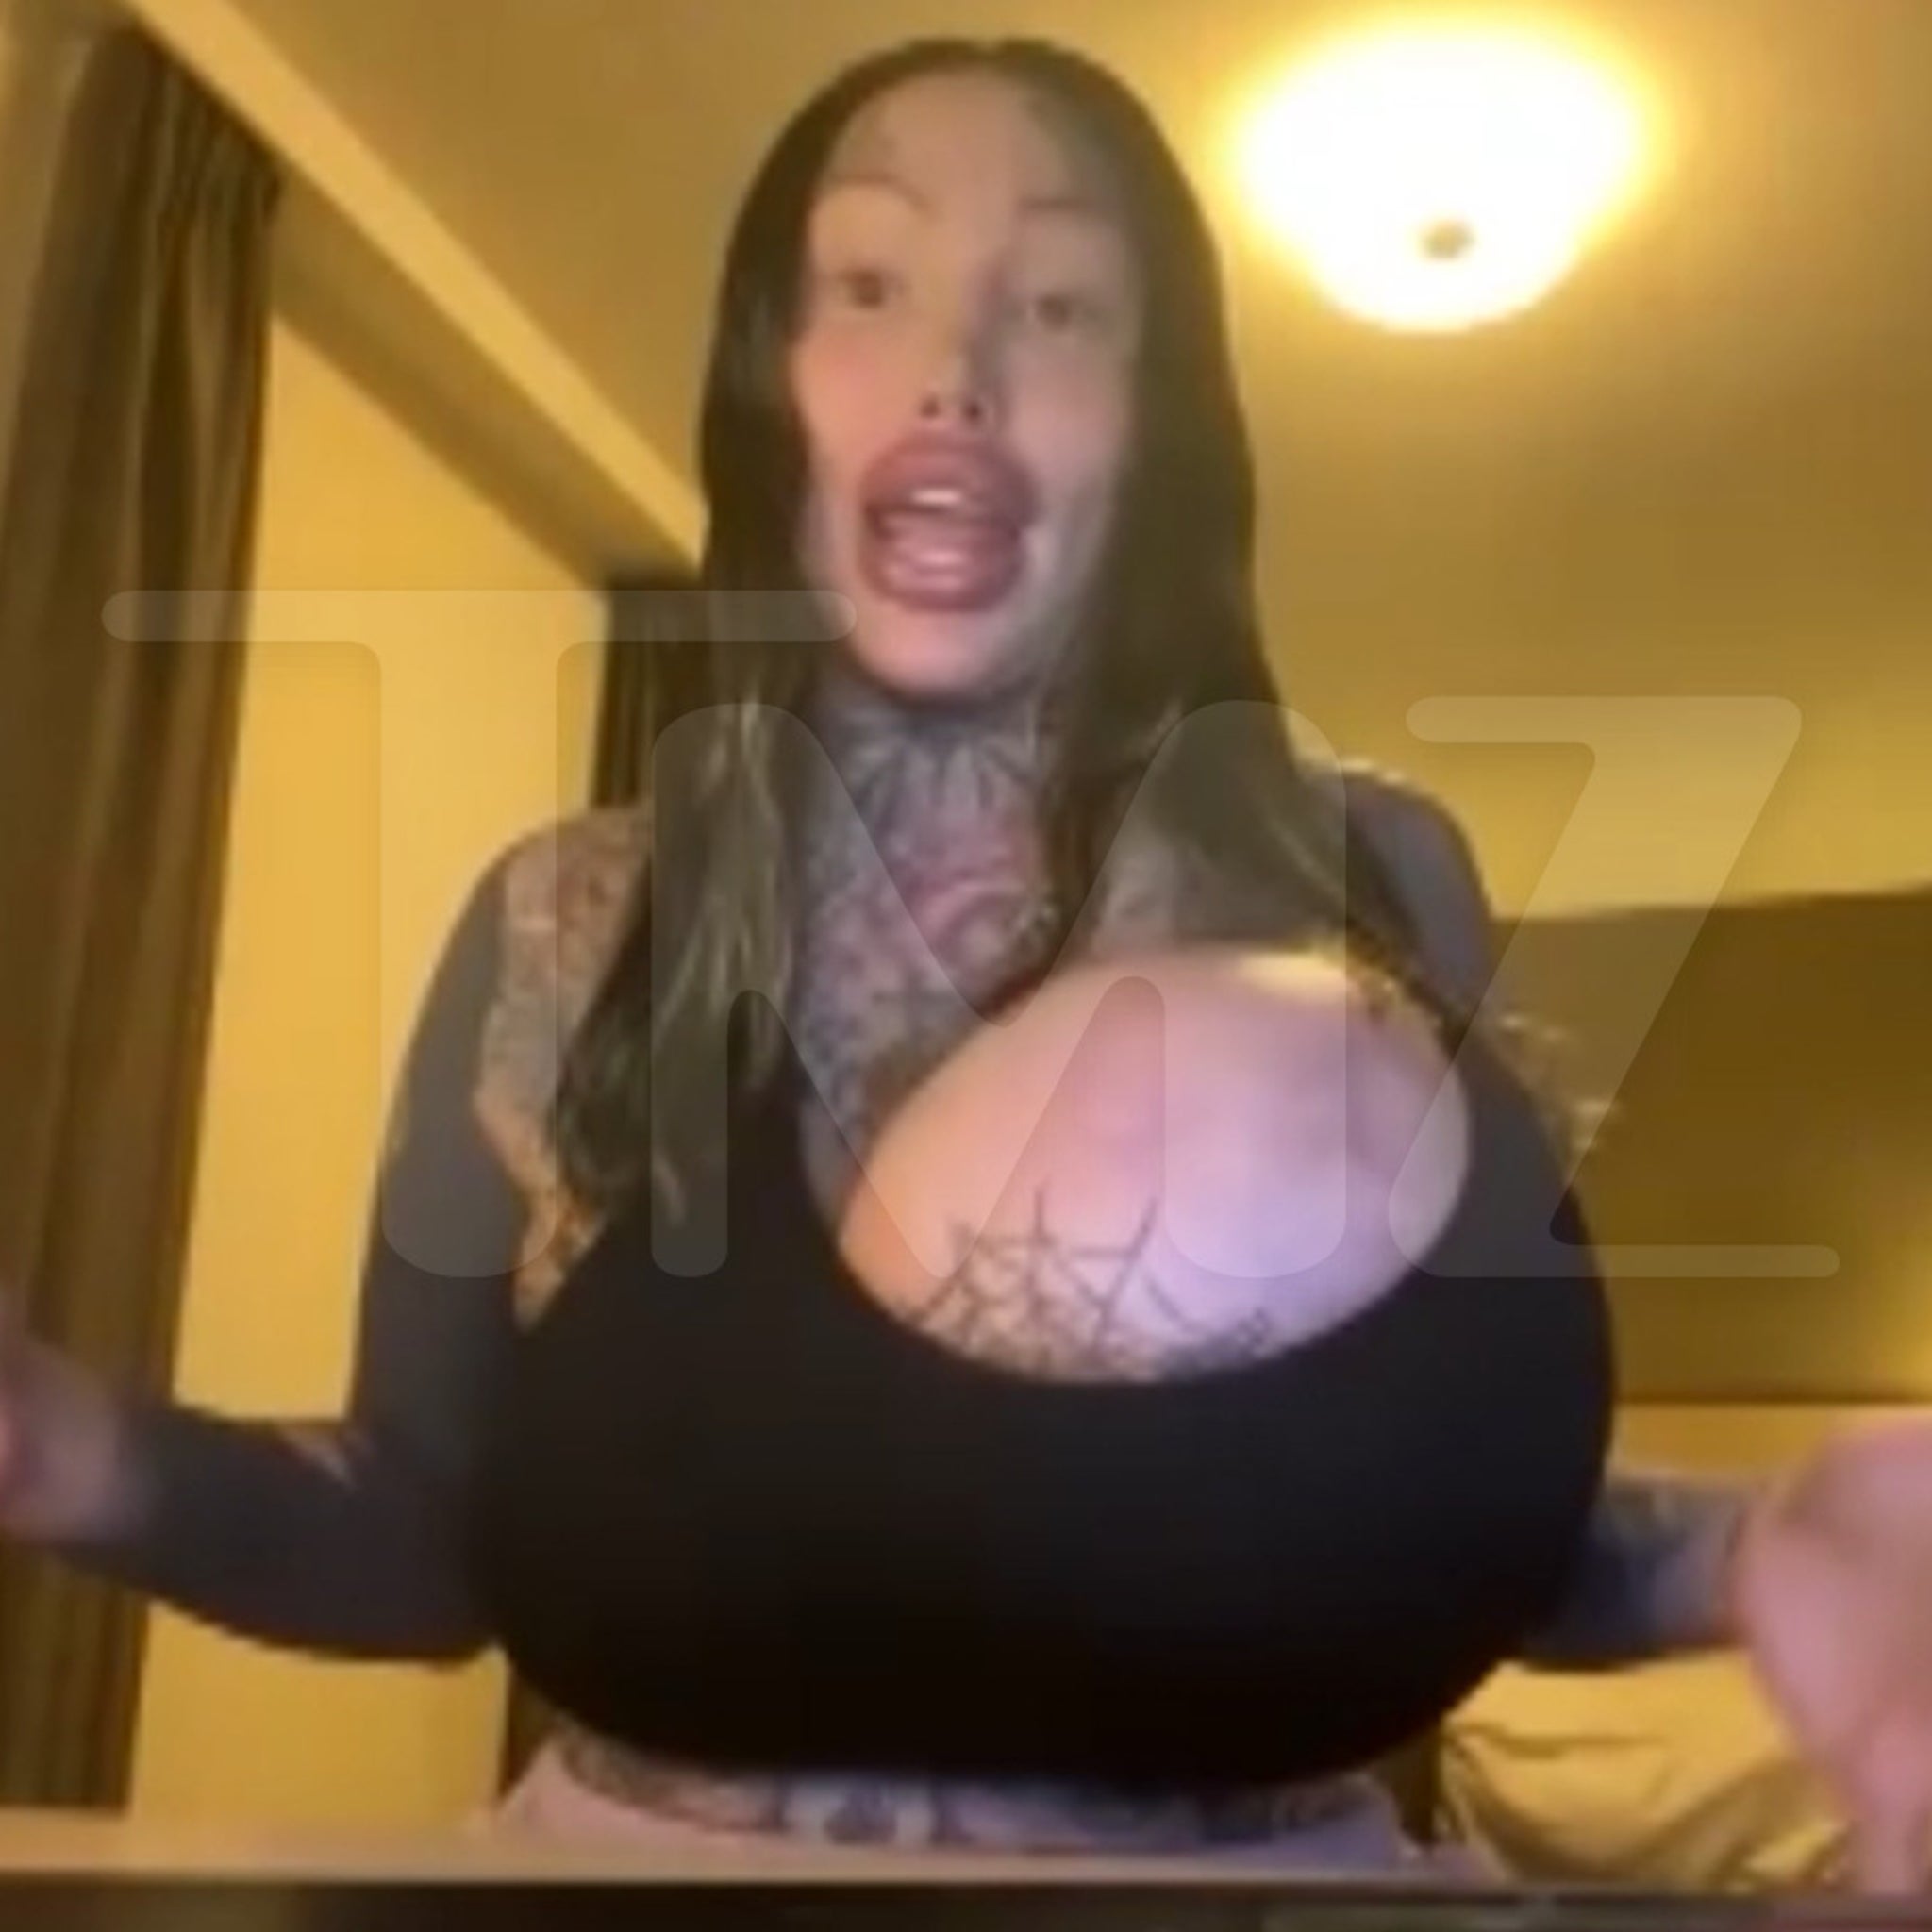 Woman Left With 'Uniboob' After Botched Surgery (Video) - Shy Magazine